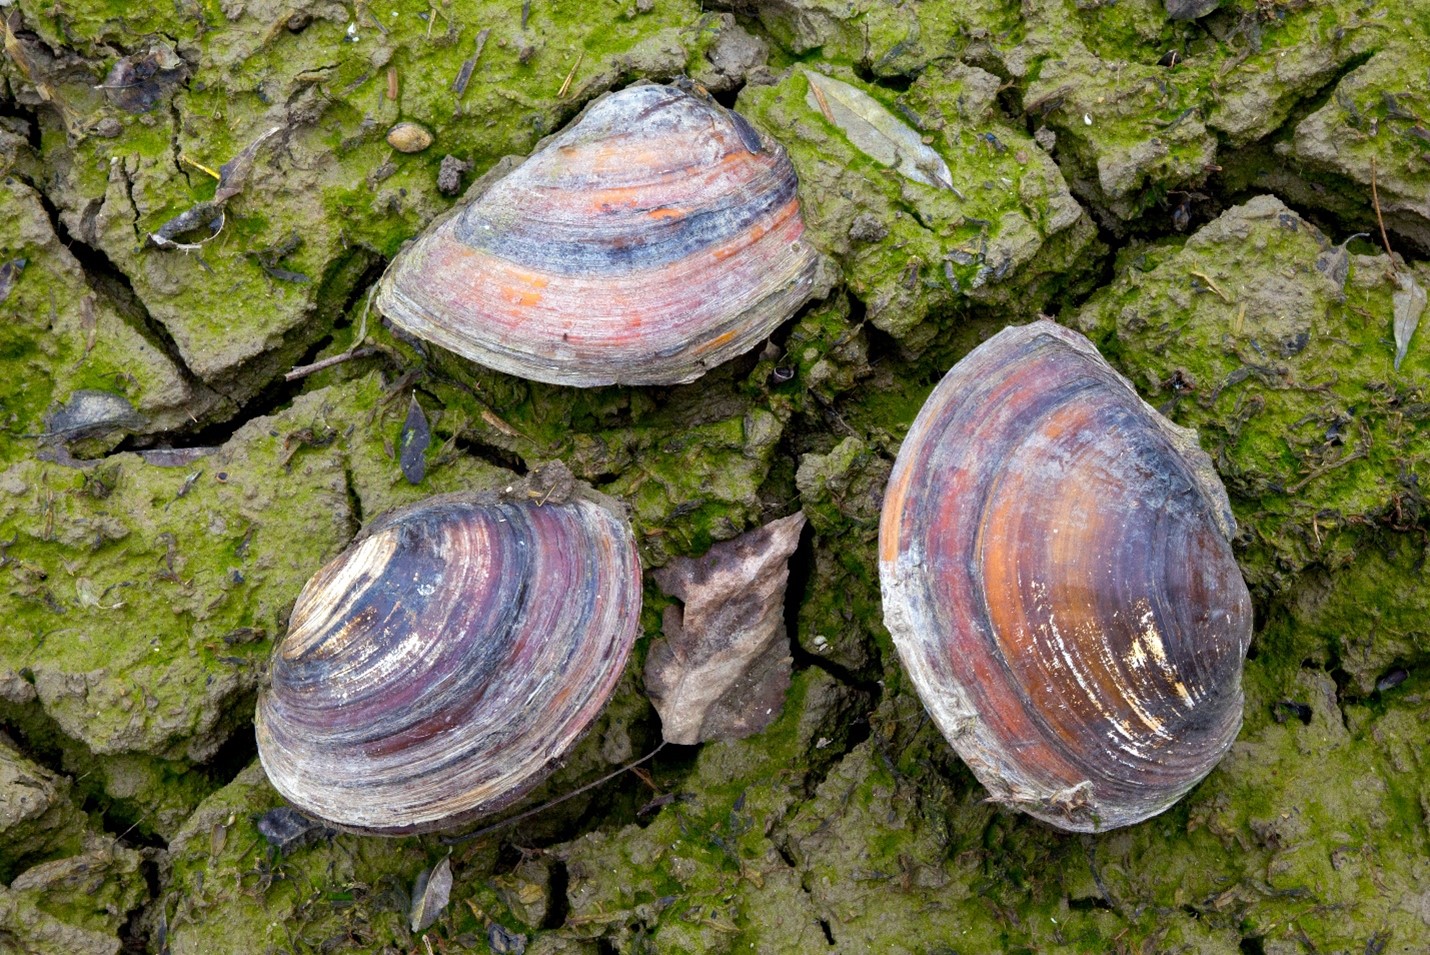 Diversity, biogeography and conservation of freshwater mussels (Bivalvia: Unionida) in East and Southeast Asia